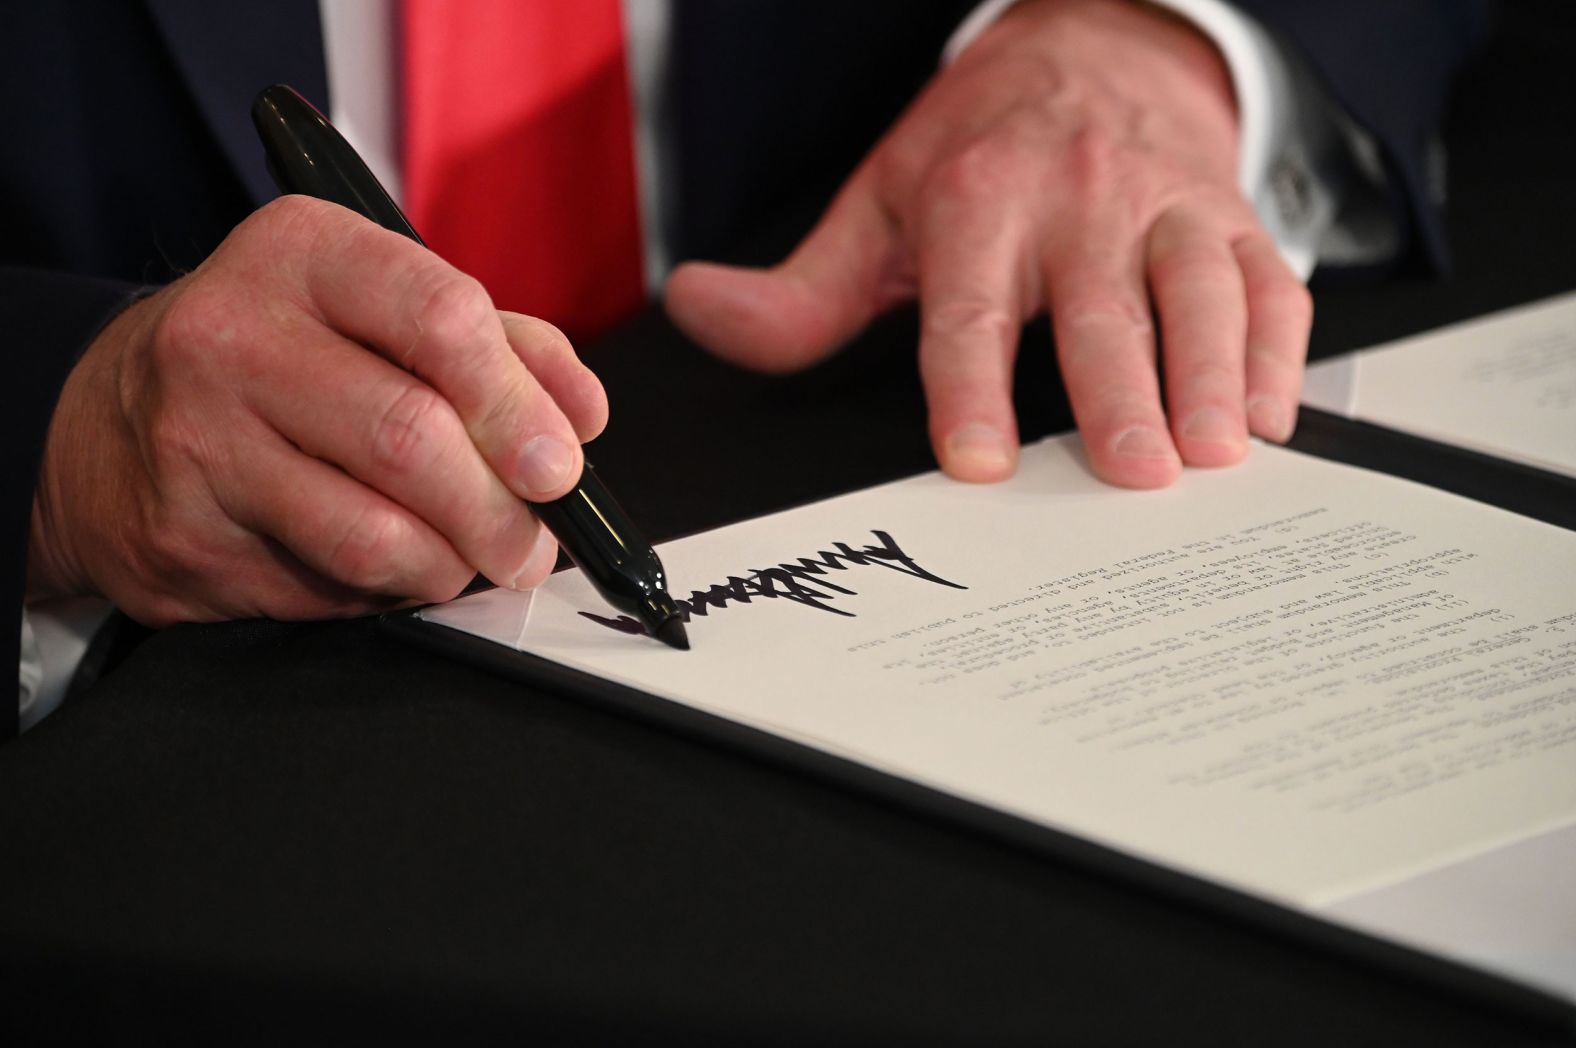 Trump signs executive orders <a href="index.php?page=&url=https%3A%2F%2Fwww.cnn.com%2F2020%2F08%2F08%2Fpolitics%2Ftrump-executive-order-stimulus%2Findex.html" target="_blank">extending coronavirus economic relief</a> in August 2020. It came after Democrats and the White House were unable to reach an agreement on a stimulus bill.